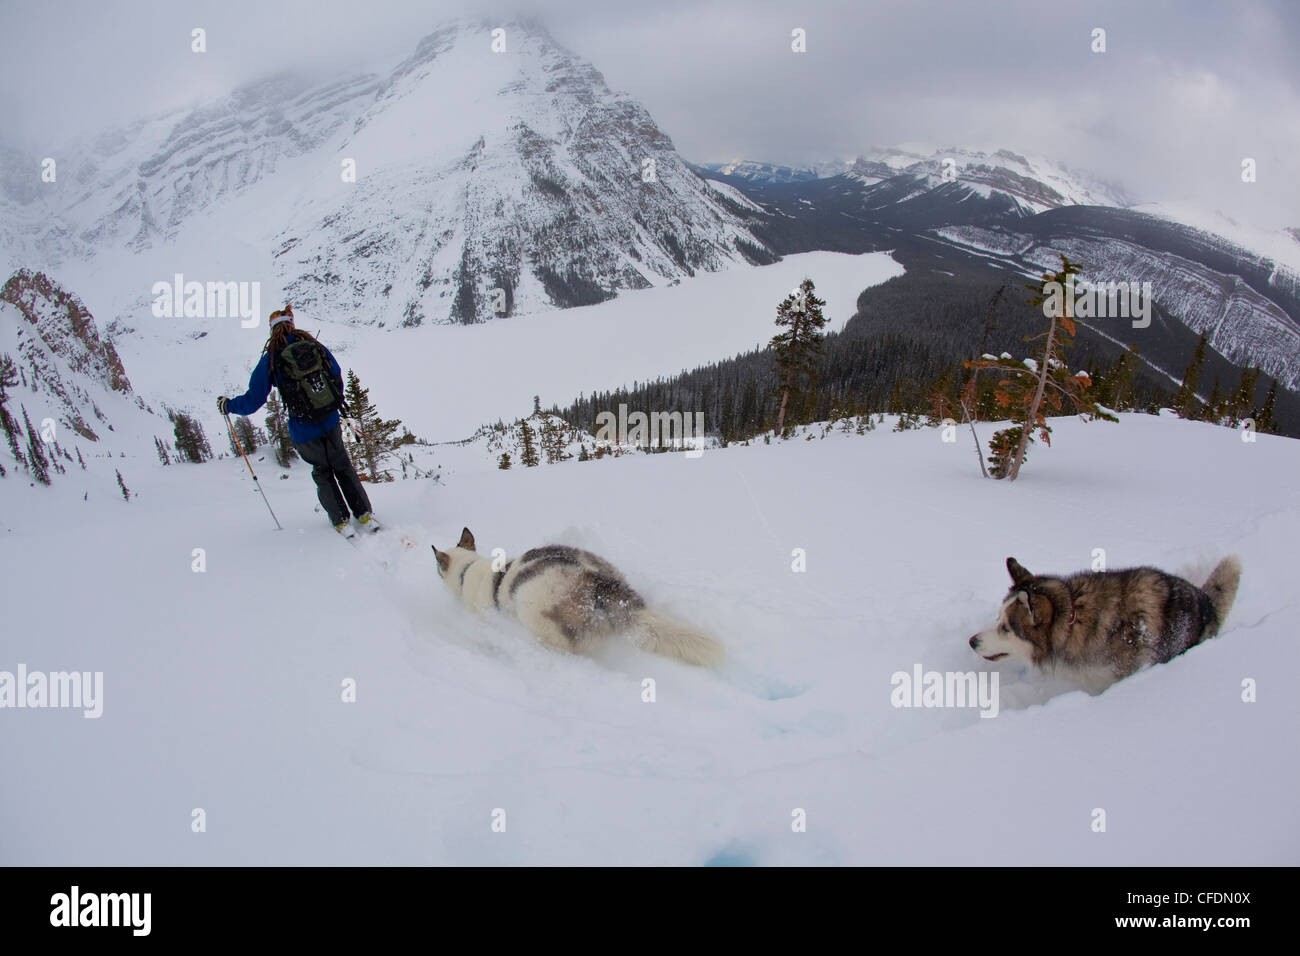 A man uses his dogs to ski tour across a frozen lake in Banff National Park, Icefields Parkway, Alberta, Canada Stock Photo